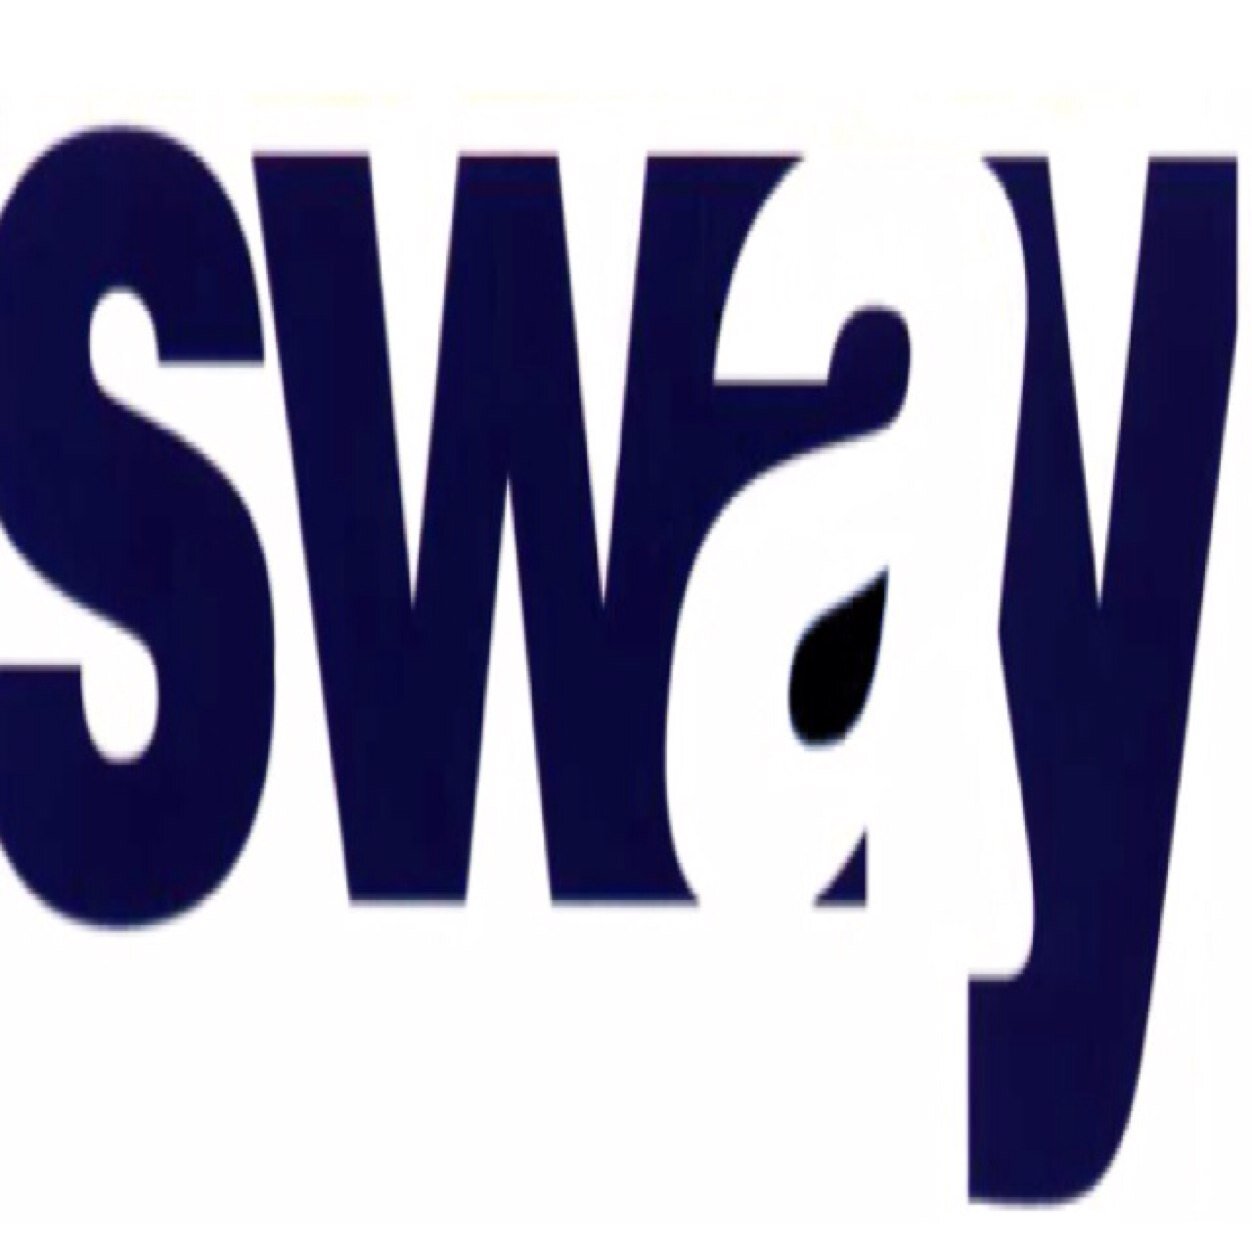 SWaY are a covers band from Cheshire.They formed in 1988 as The Listening Room doing their own material .In 1997 created SWaY covering from 60's to present day